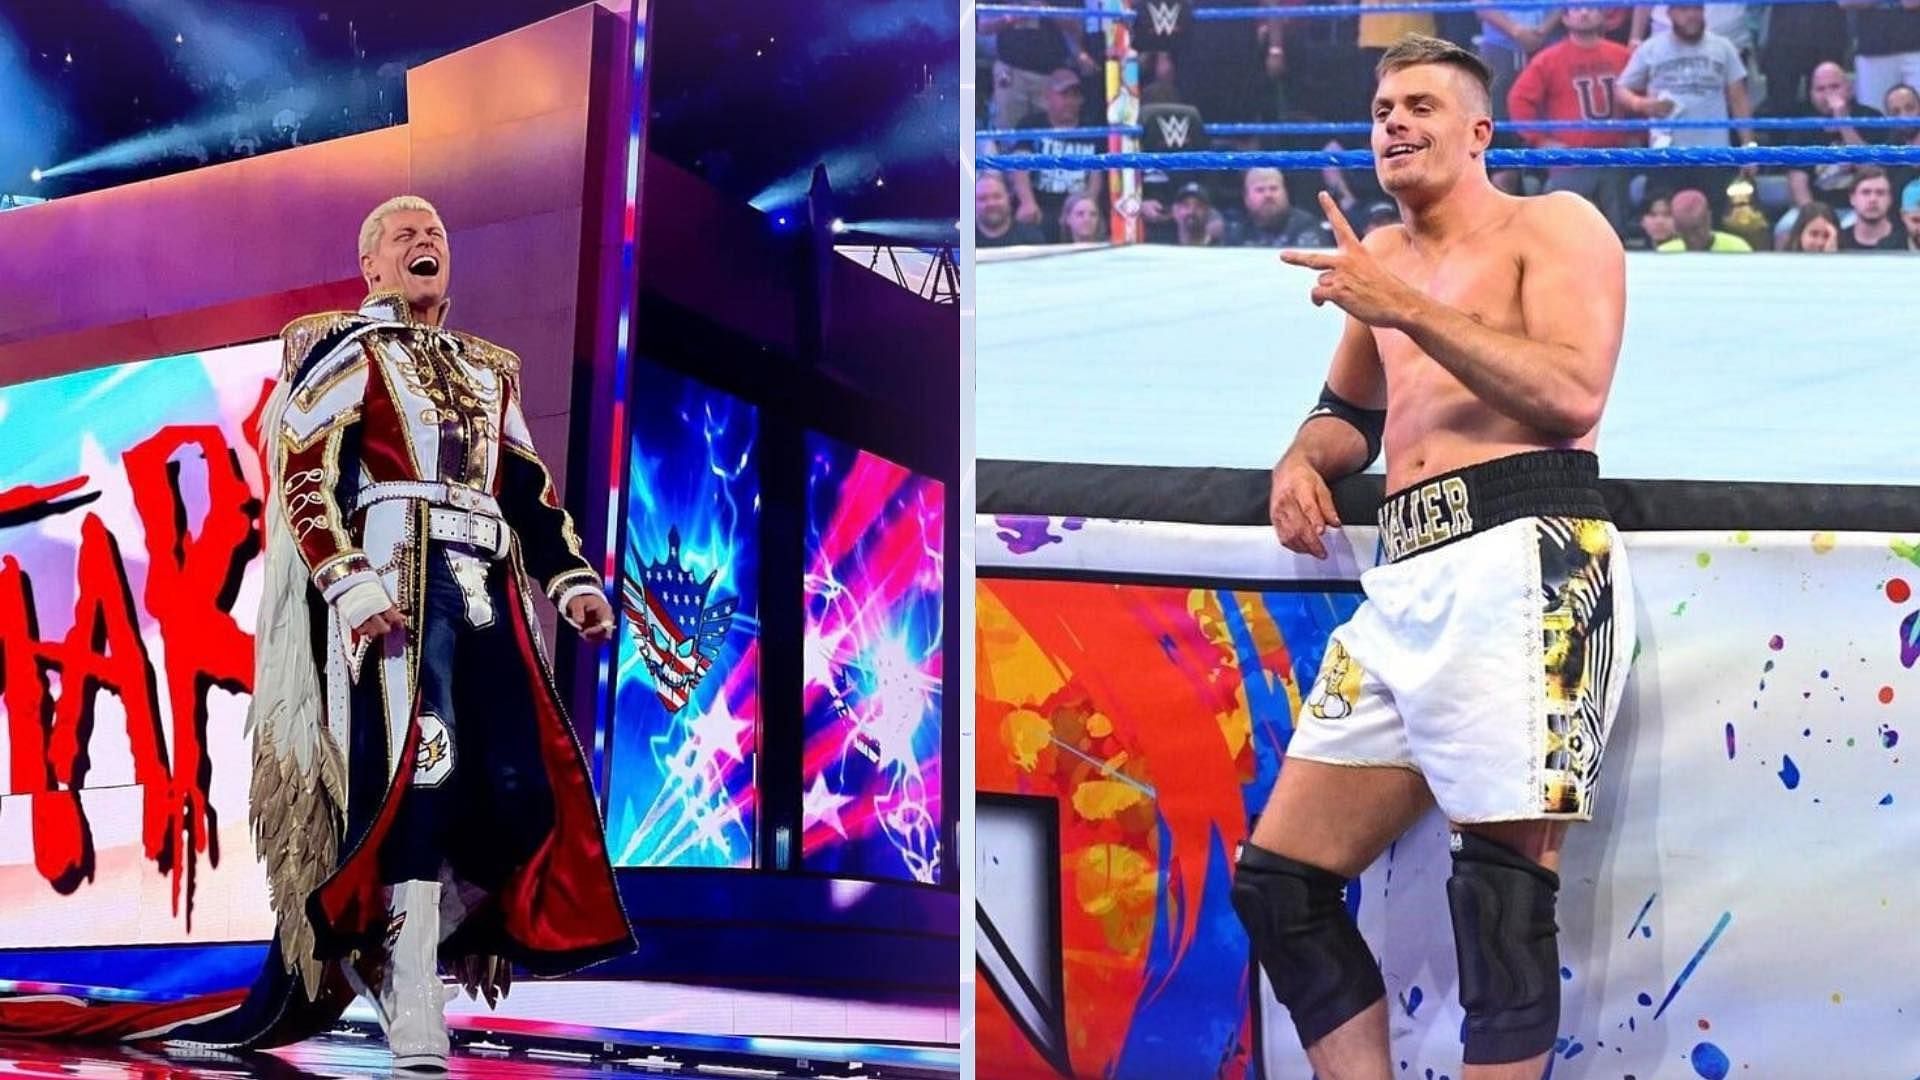 Cody Rhodes is set to interact with Grayson Waller at WWE Payback